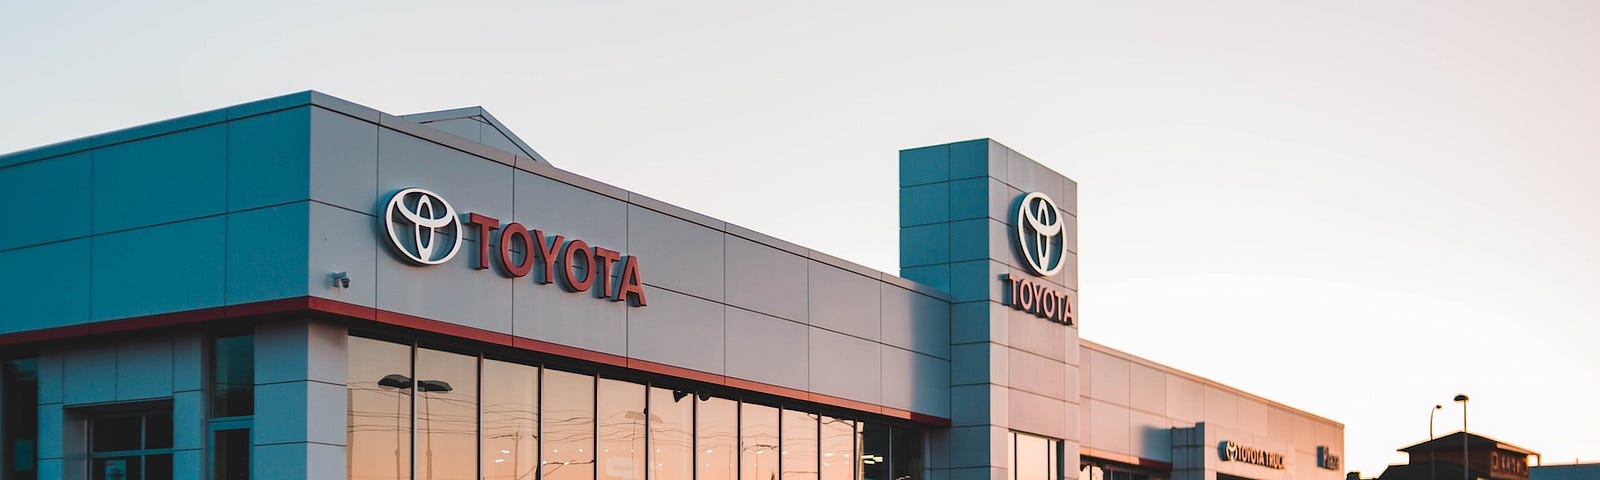 IMAGE: A Toyota car dealership seen from afar